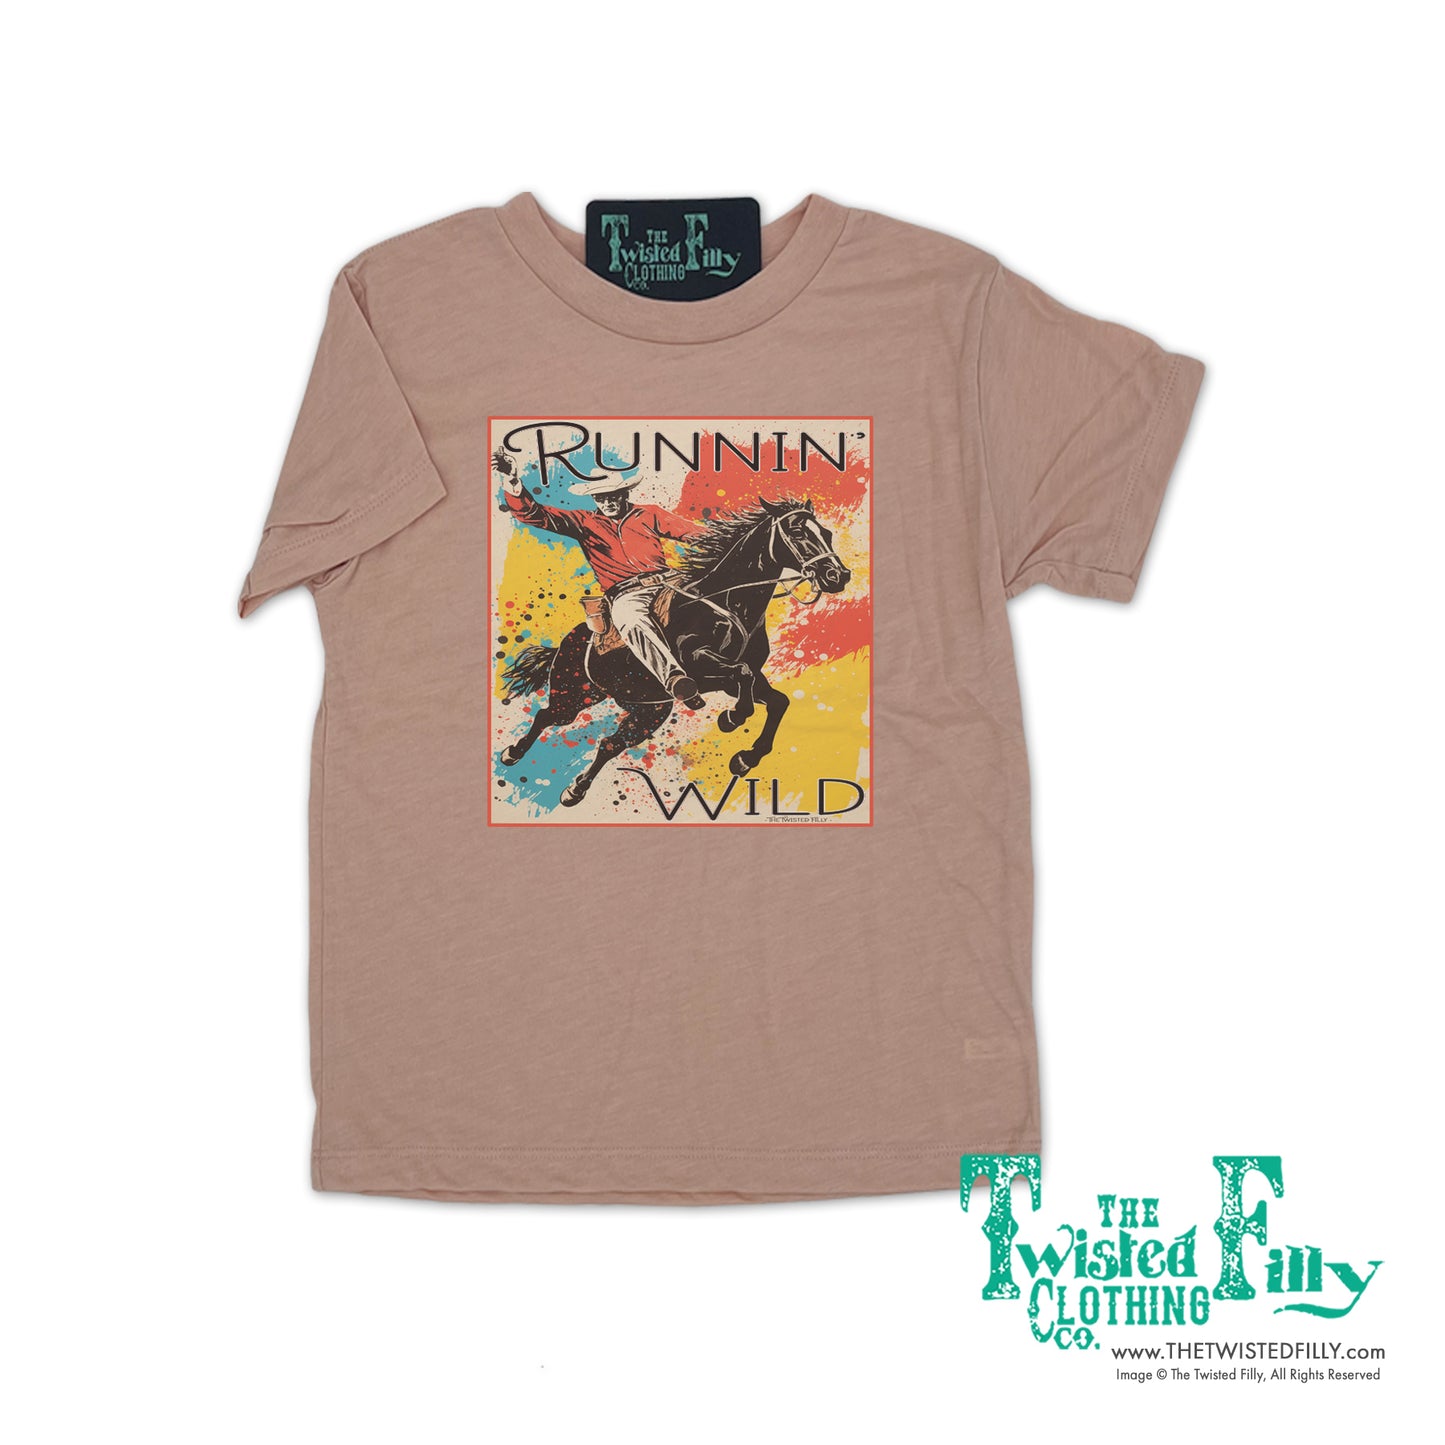 Runnin' Wild - S/S Youth Tee - Assorted Colors